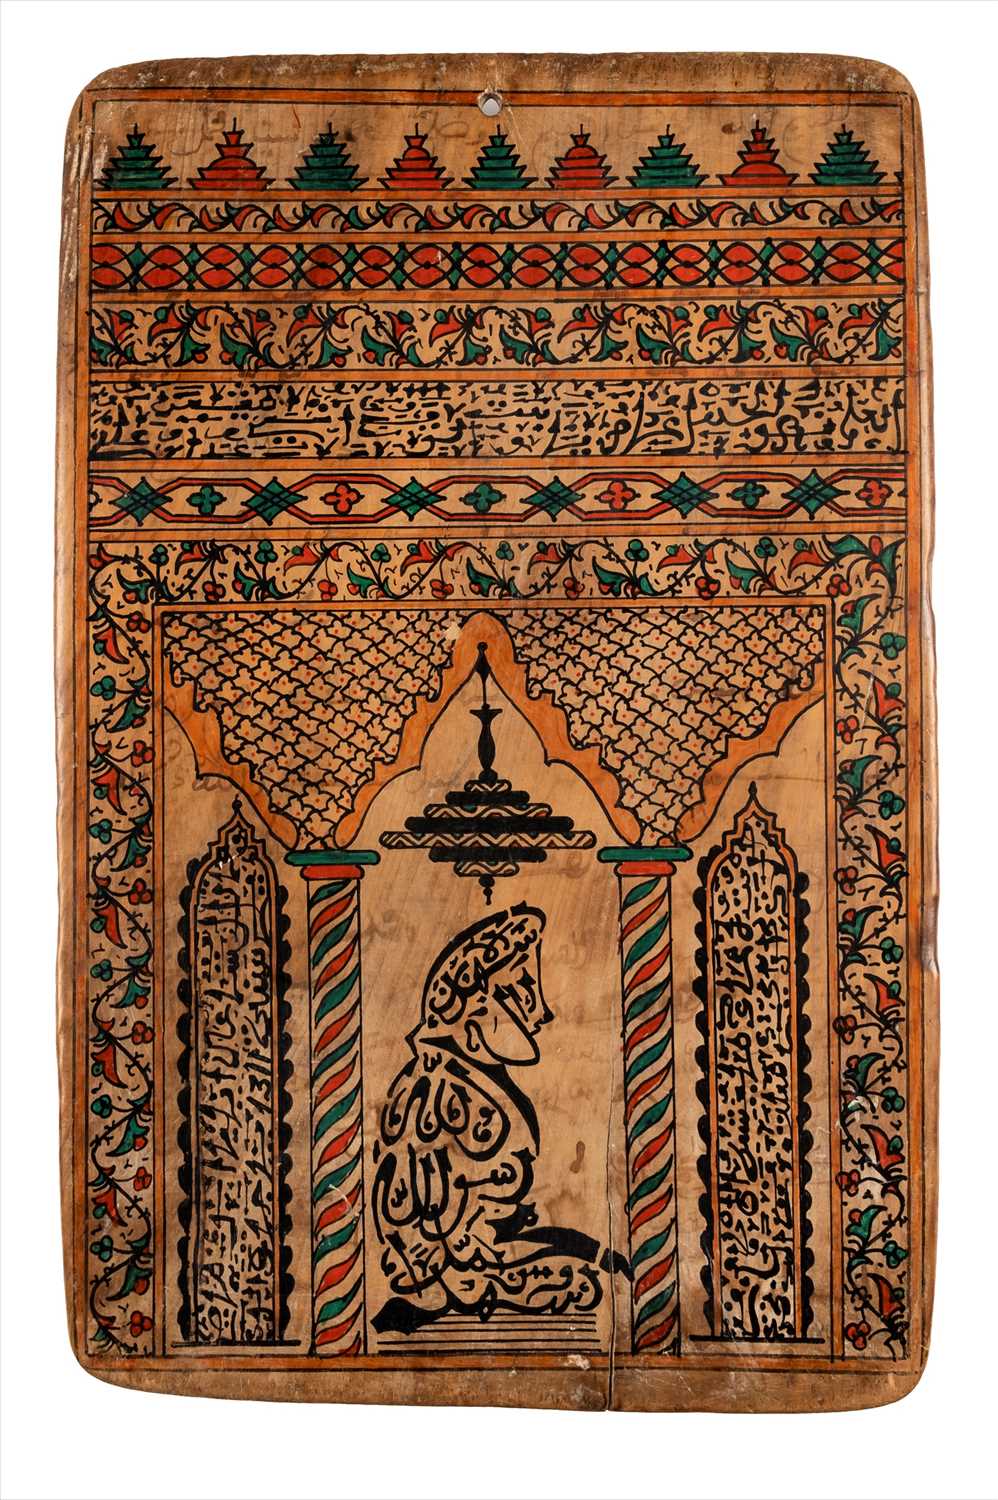 Lot 78 - Arabic tablet. Decorative tablet (lawhah), North Africa, c.1900, & other items